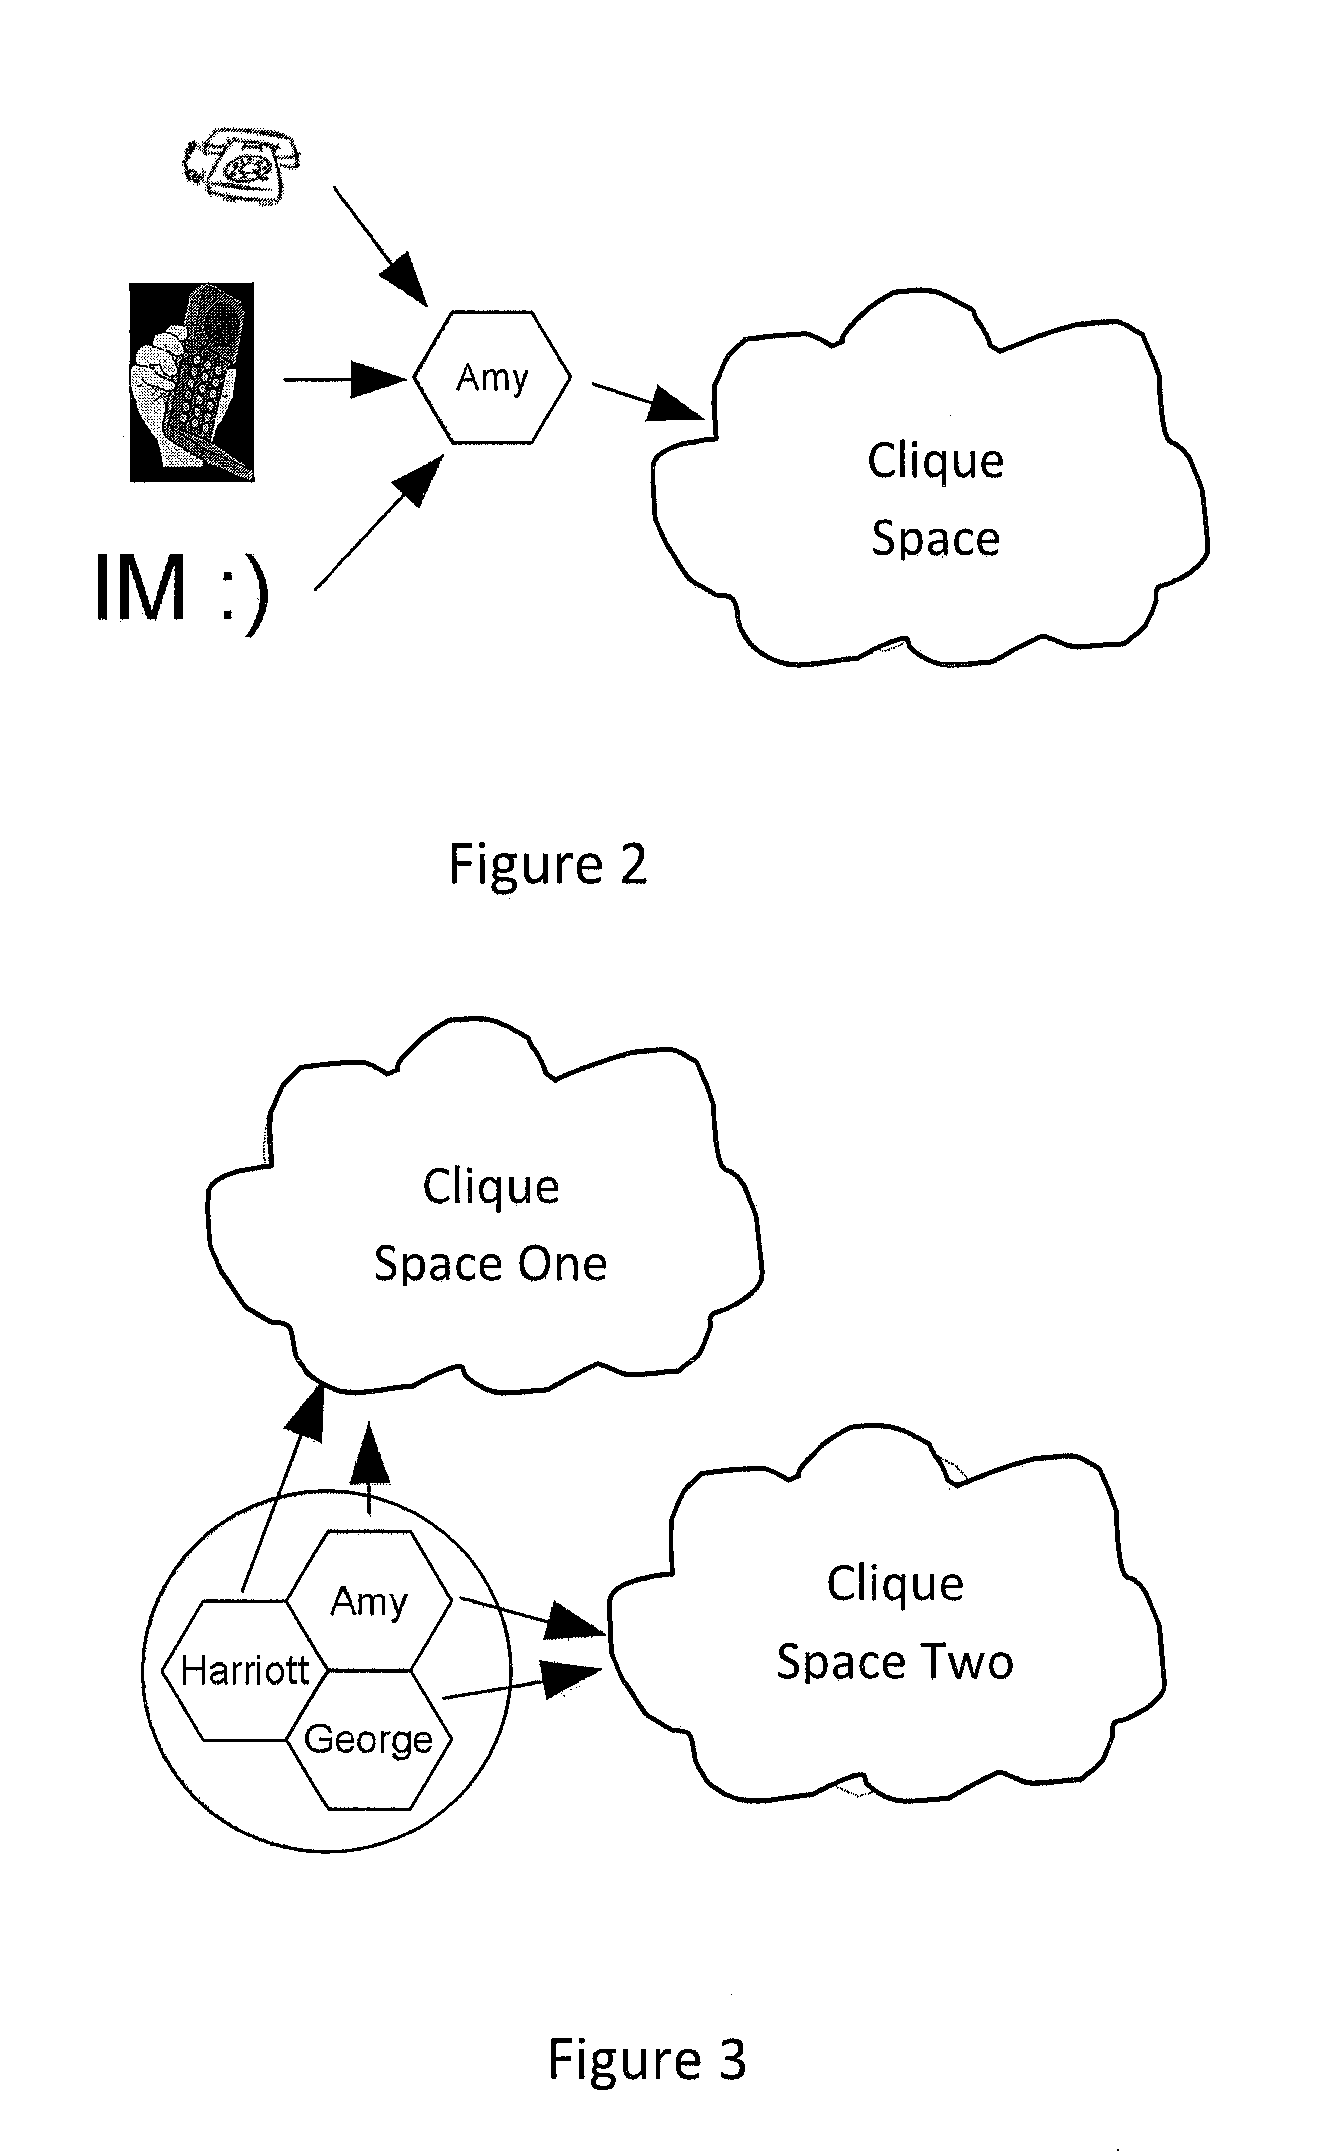 Real-time communication and information collaboration system